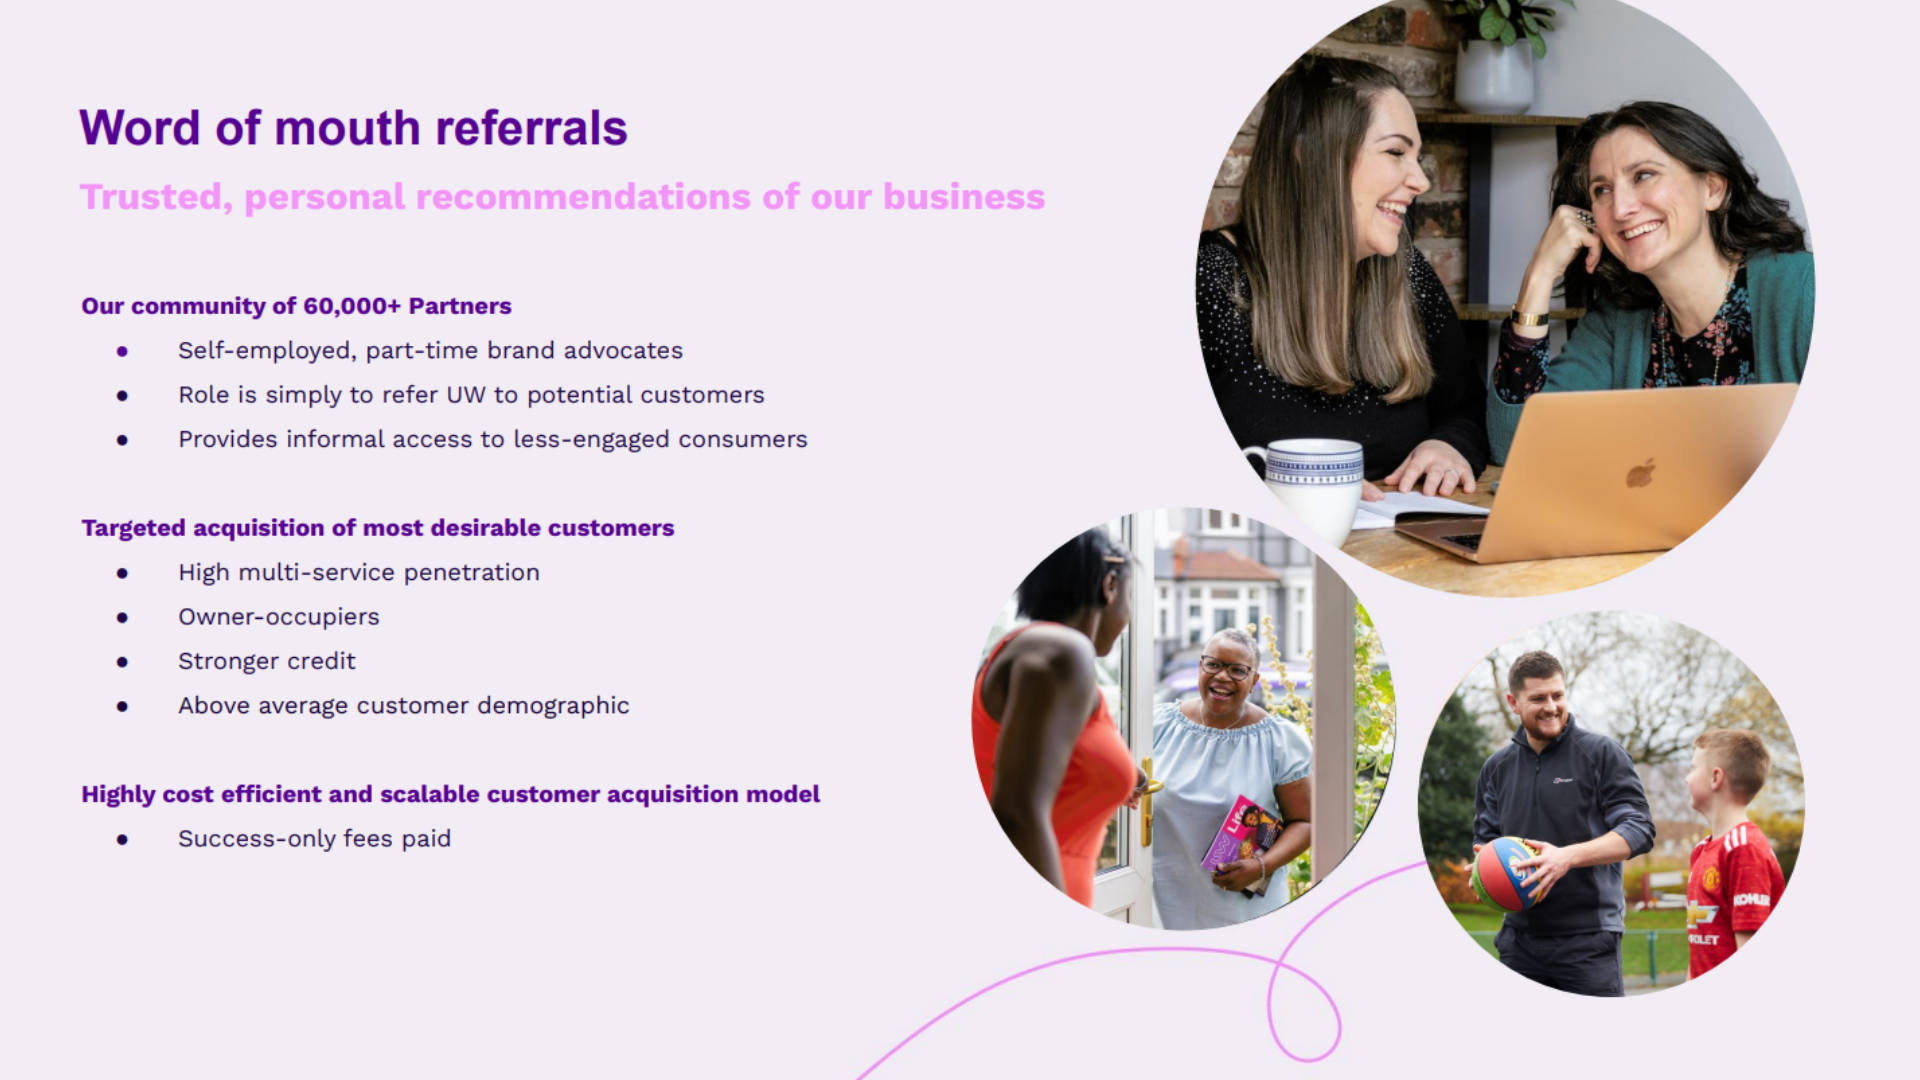 Utility Warehouse word-of-mouth referrals via 60000 UW Partners